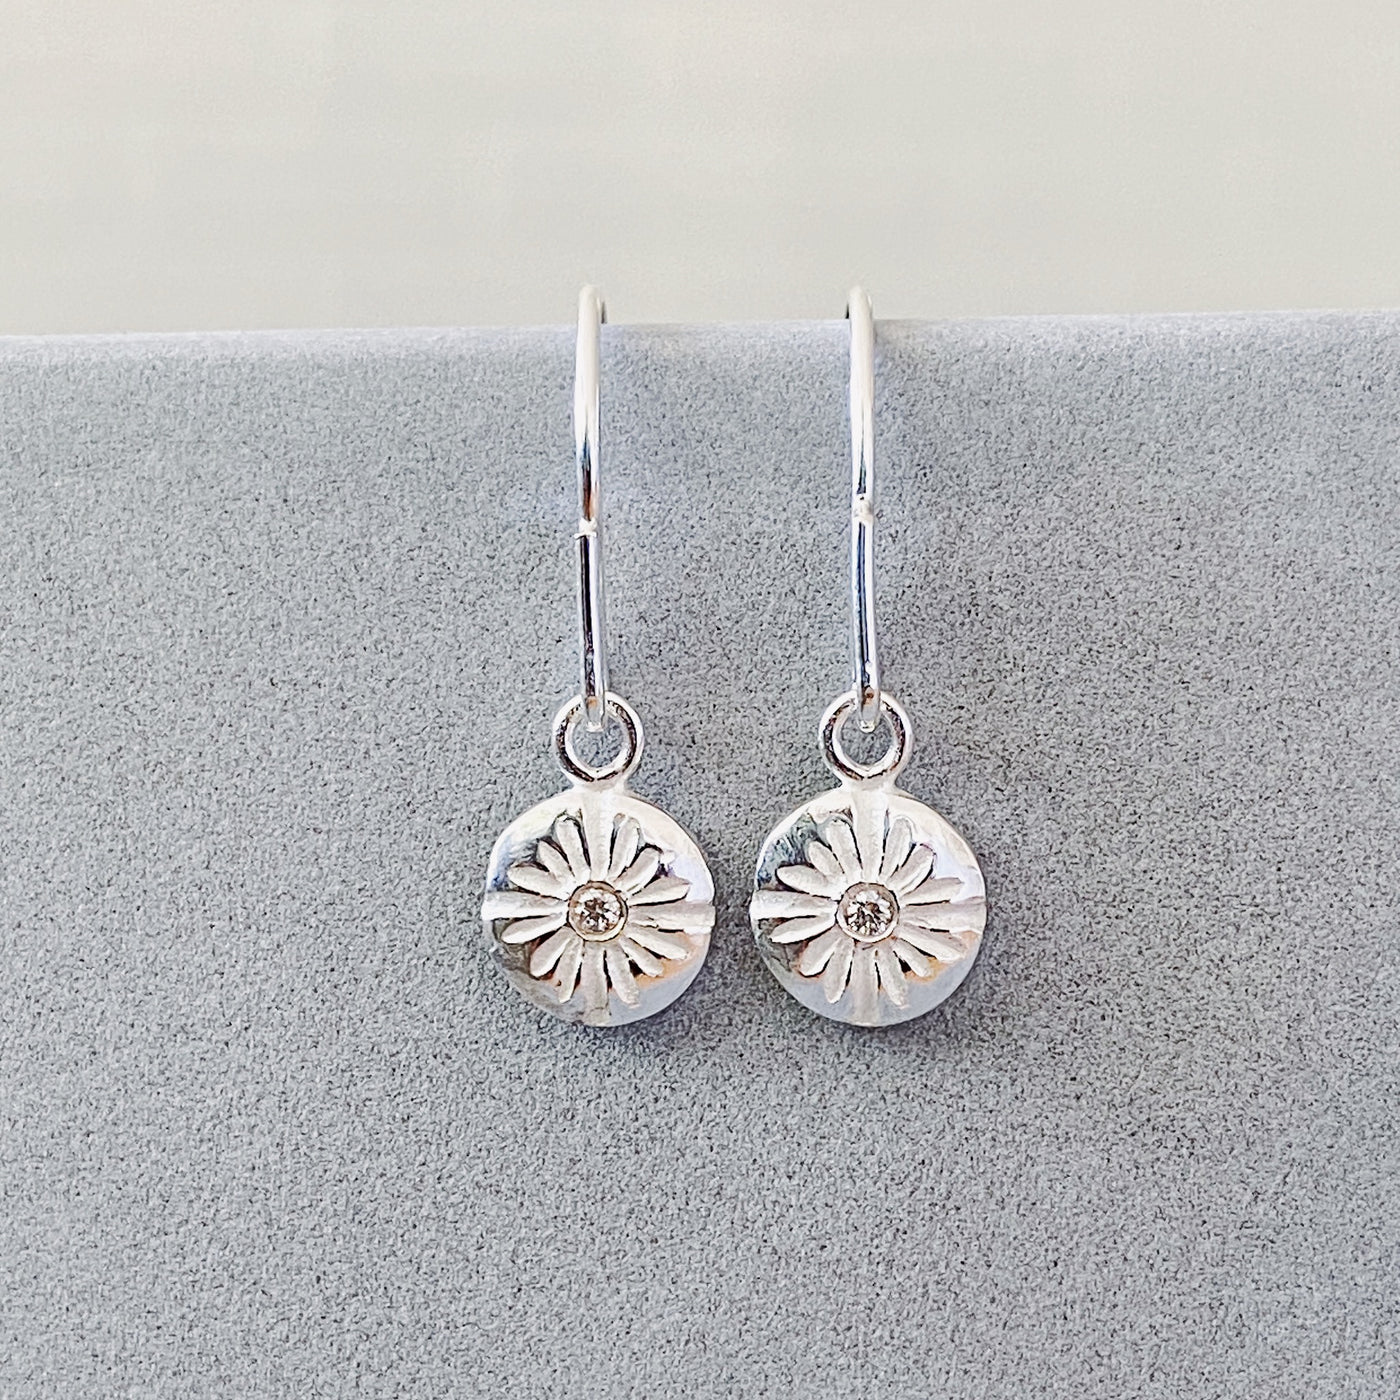 Lucia Small Dangle Earrings in Silver | Corey Egan in natural light